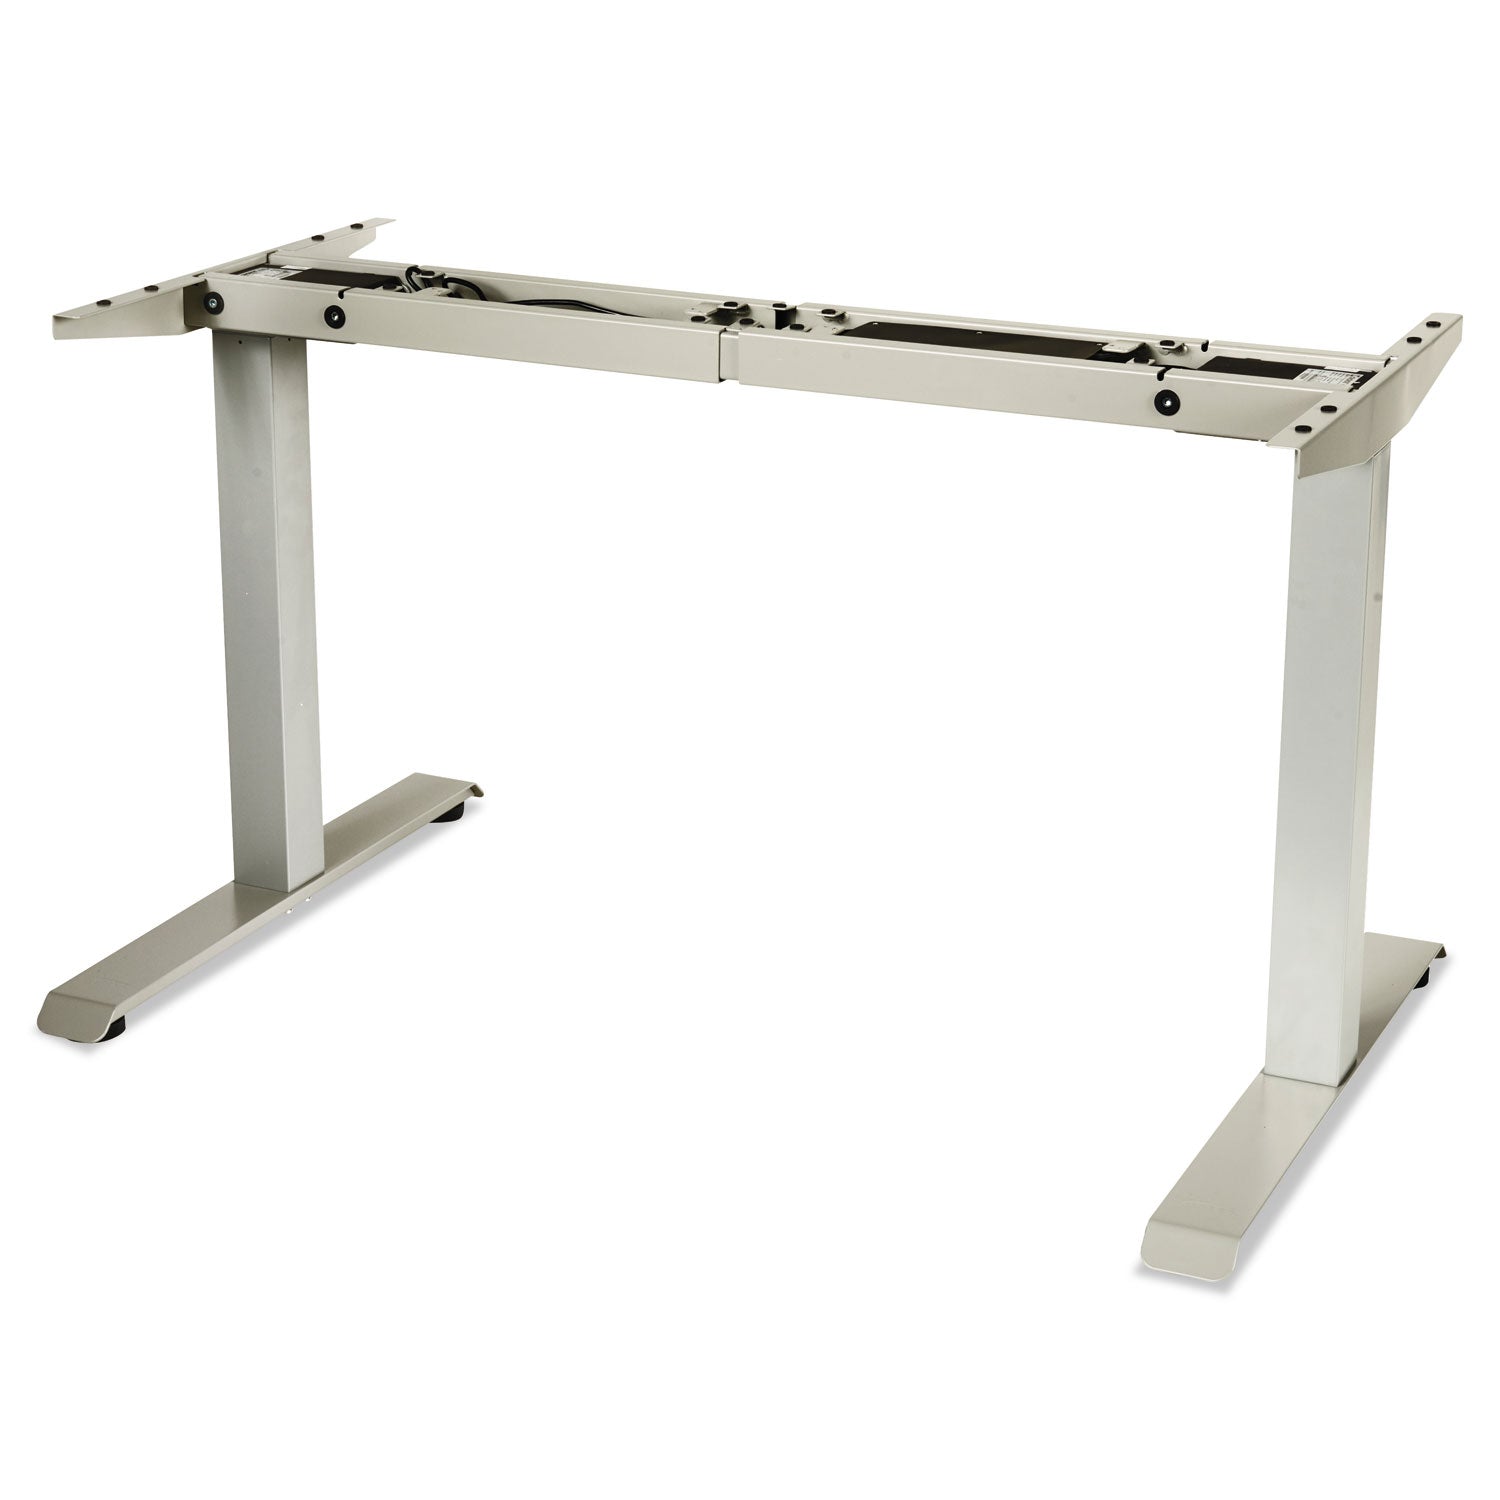 adaptivergo-sit-stand-two-stage-electric-height-adjustable-table-base-4806-x-2435-x-275-to-472-gray_aleht2ssg - 4